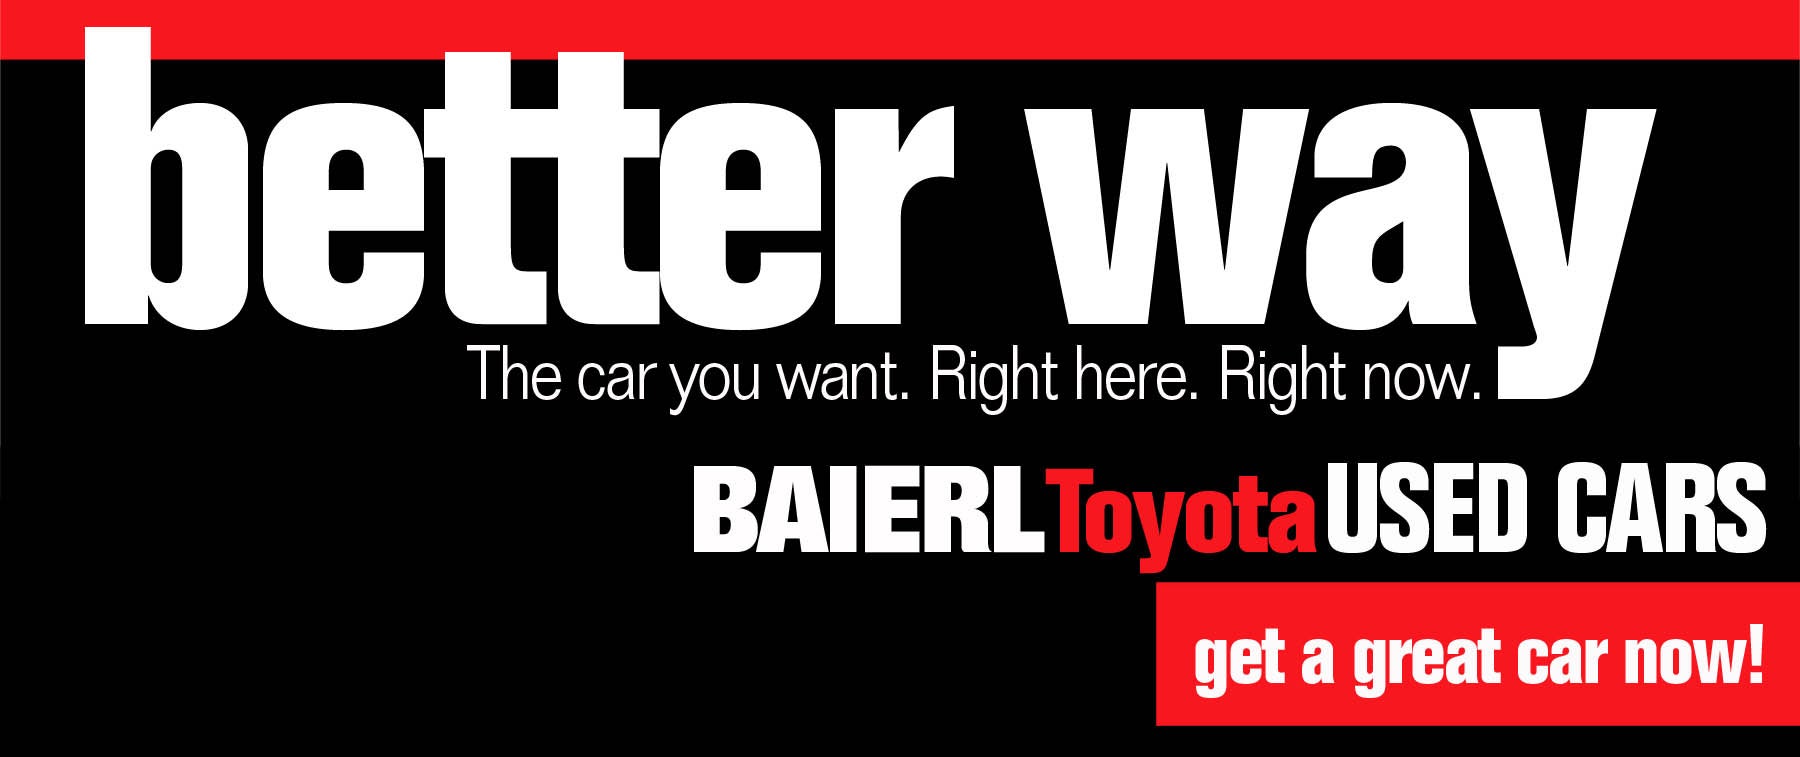 Baierl Toyota Used Cars.